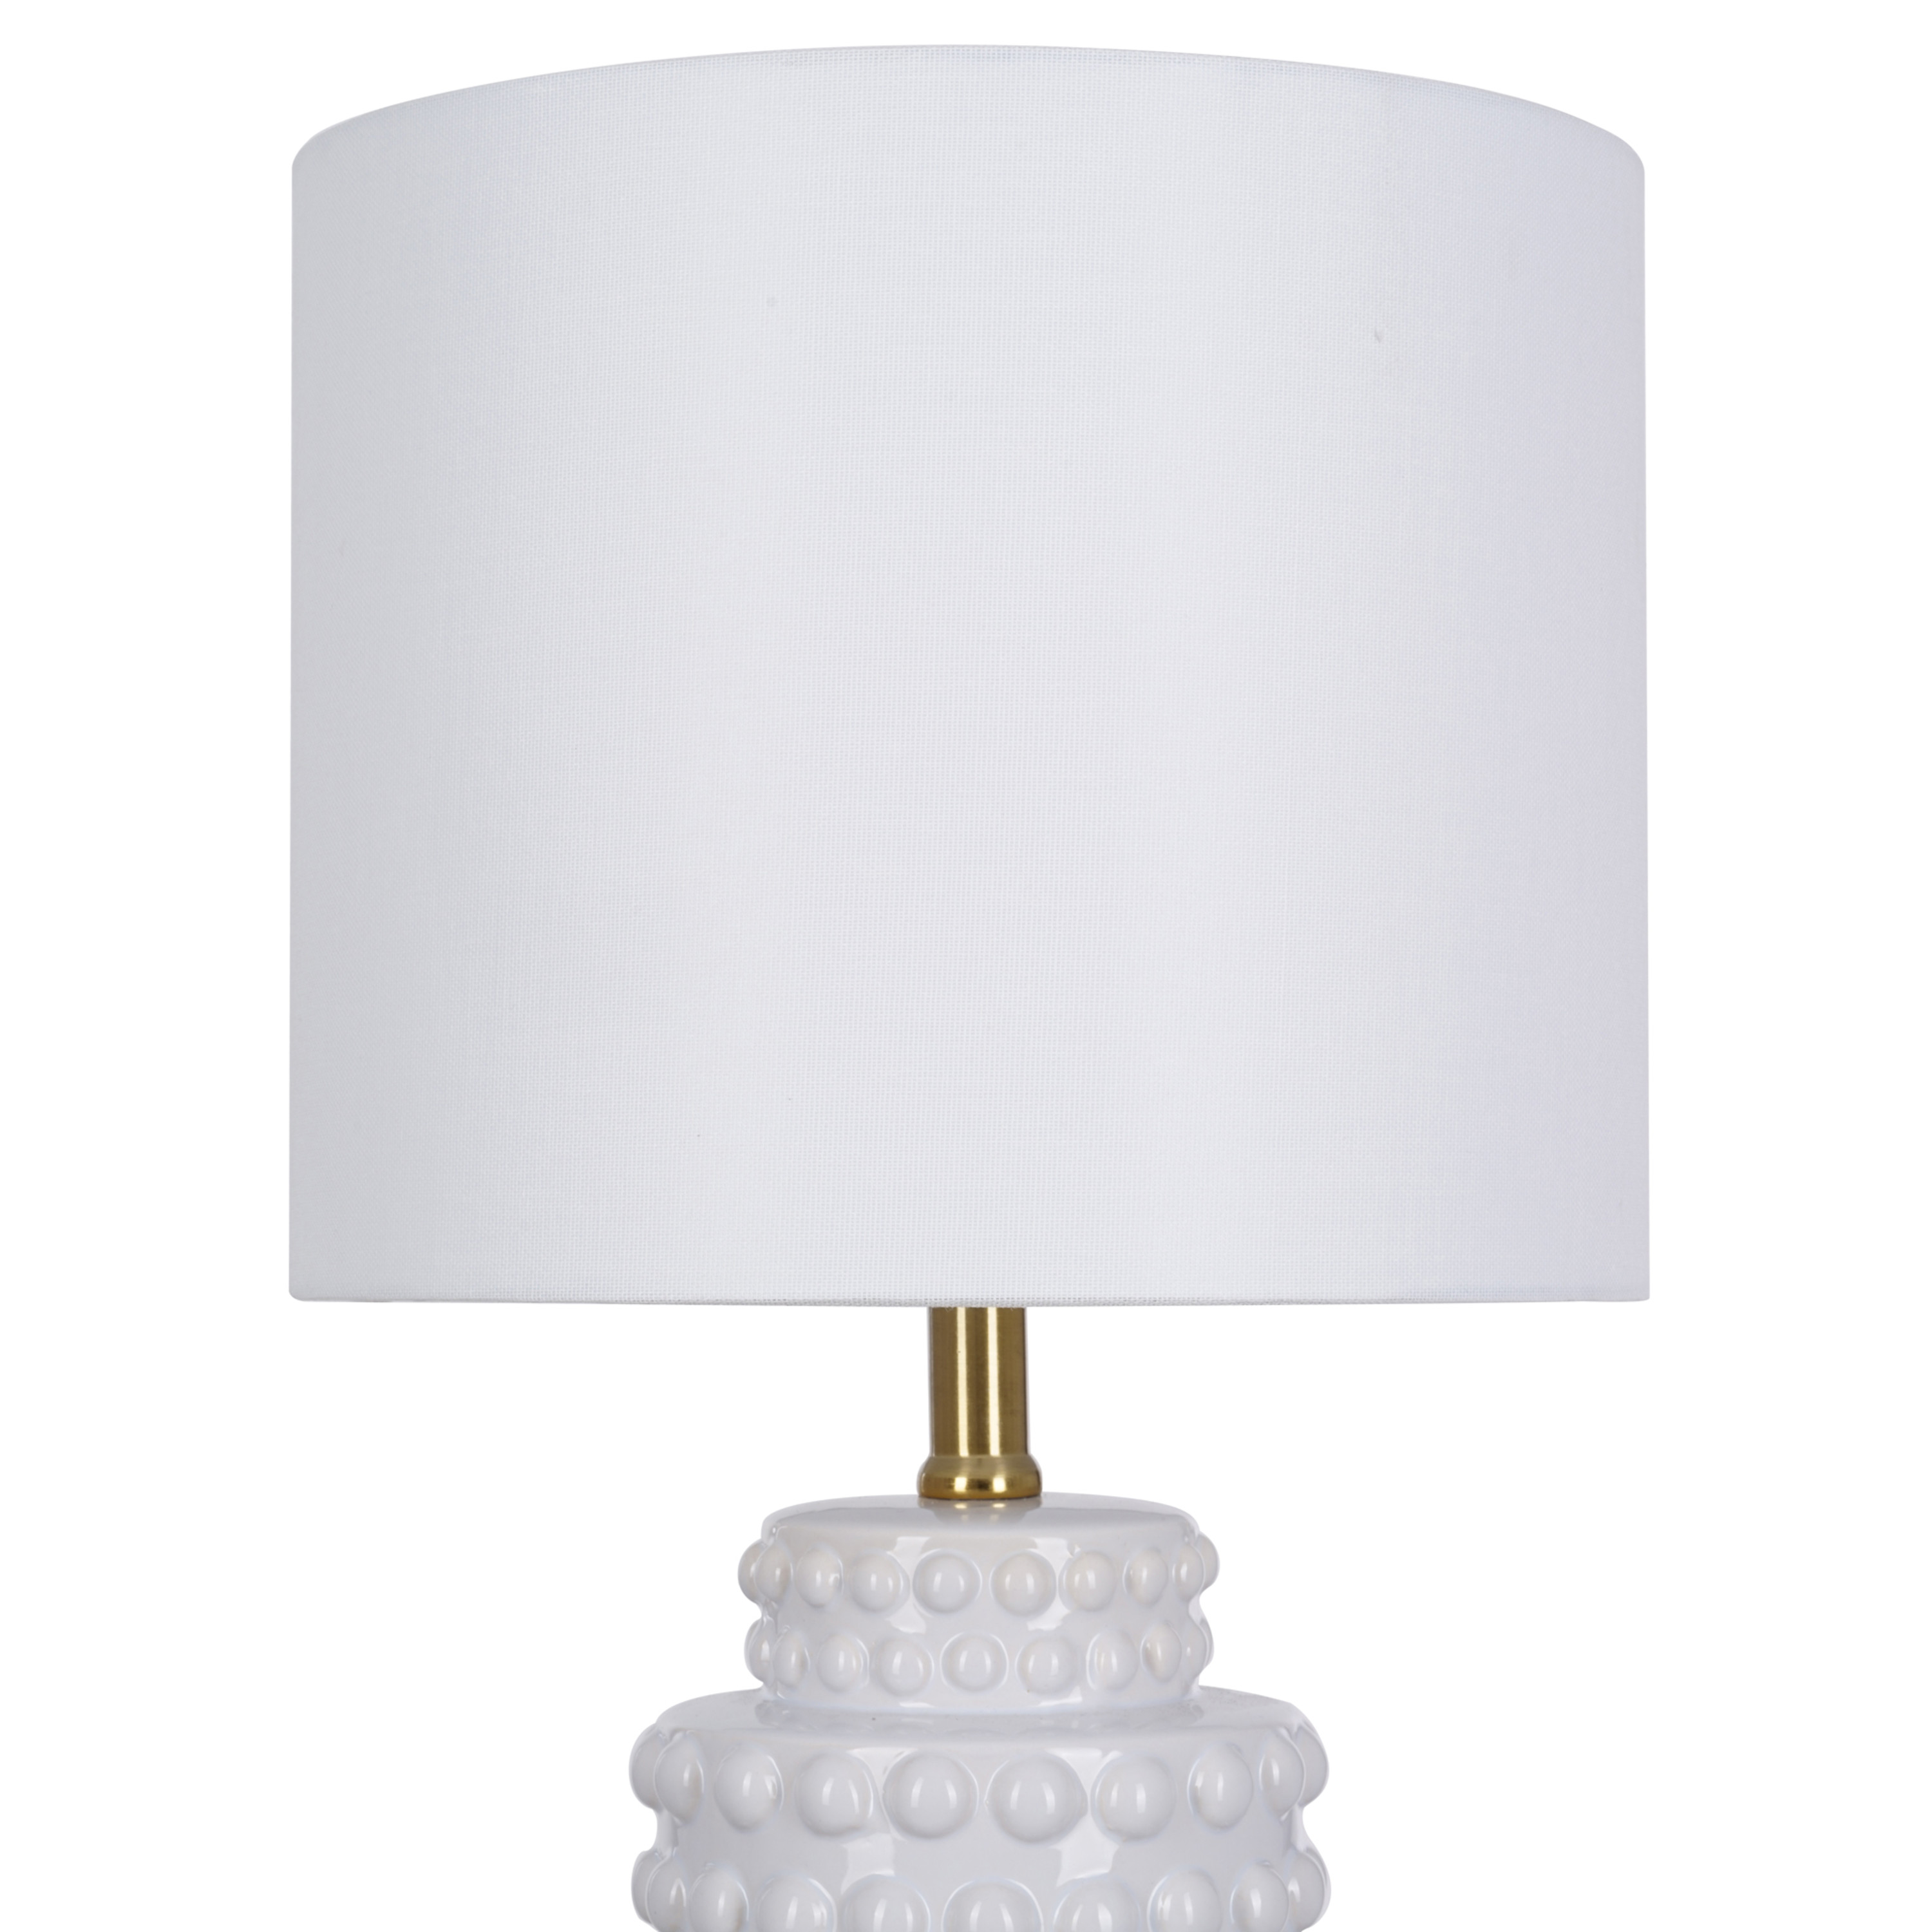 My Texas House 21" Hob-Nail Ceramic Table Lamp, Brass Accents, White Finish - image 4 of 8